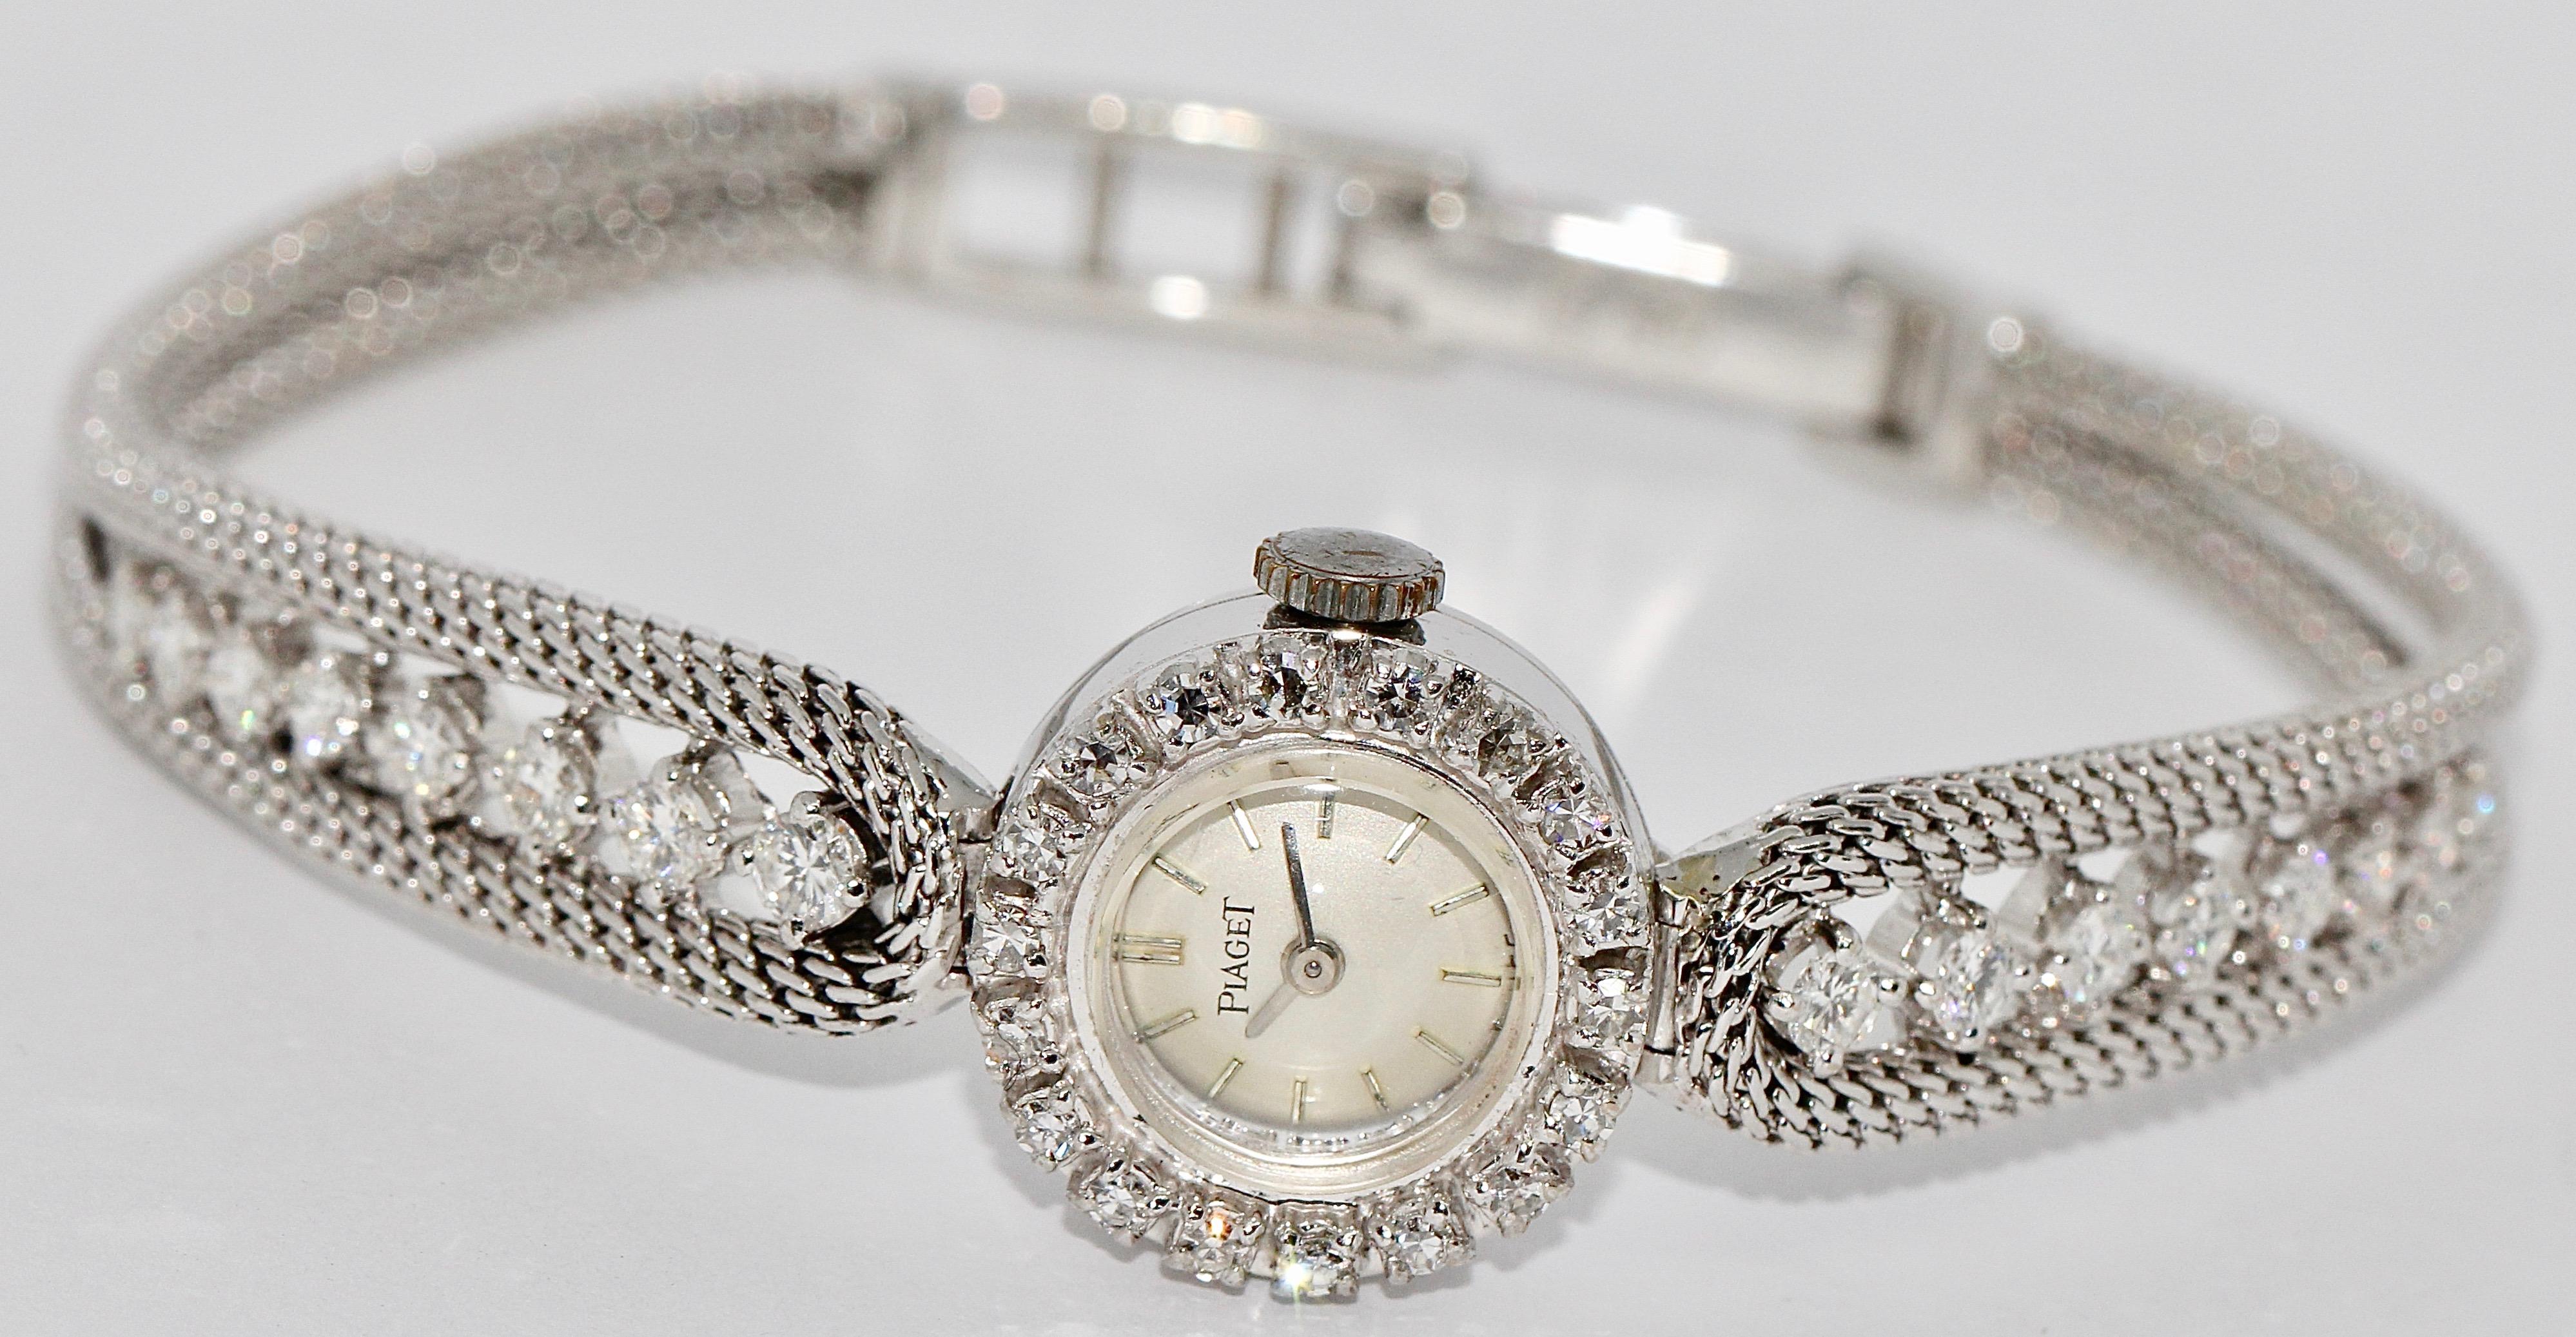 Elegant, dainty Ladies Wristwatch by Piaget, 18 Karat white Gold with Diamonds, manual wind.

The watch comes with a certificate of authenticity.